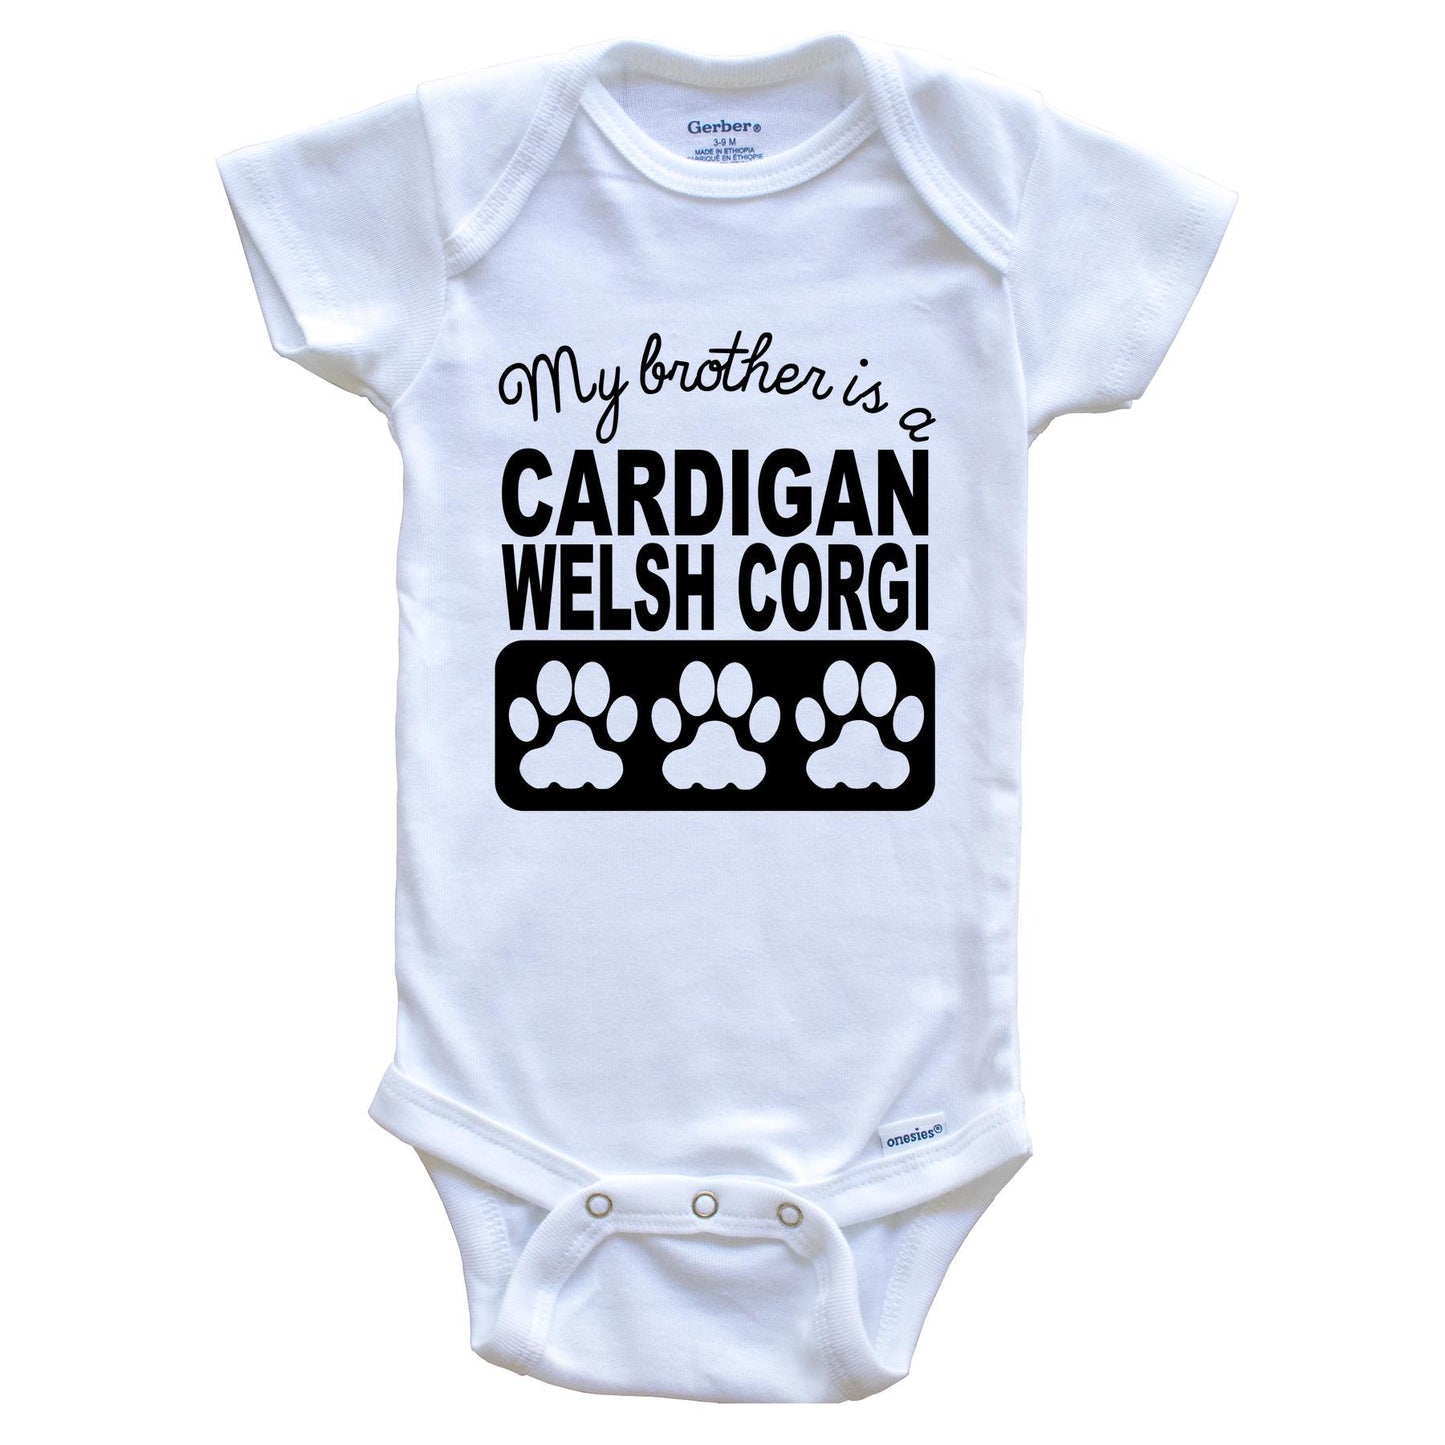 My Brother Is A Cardigan Welsh Corgi Baby Onesie